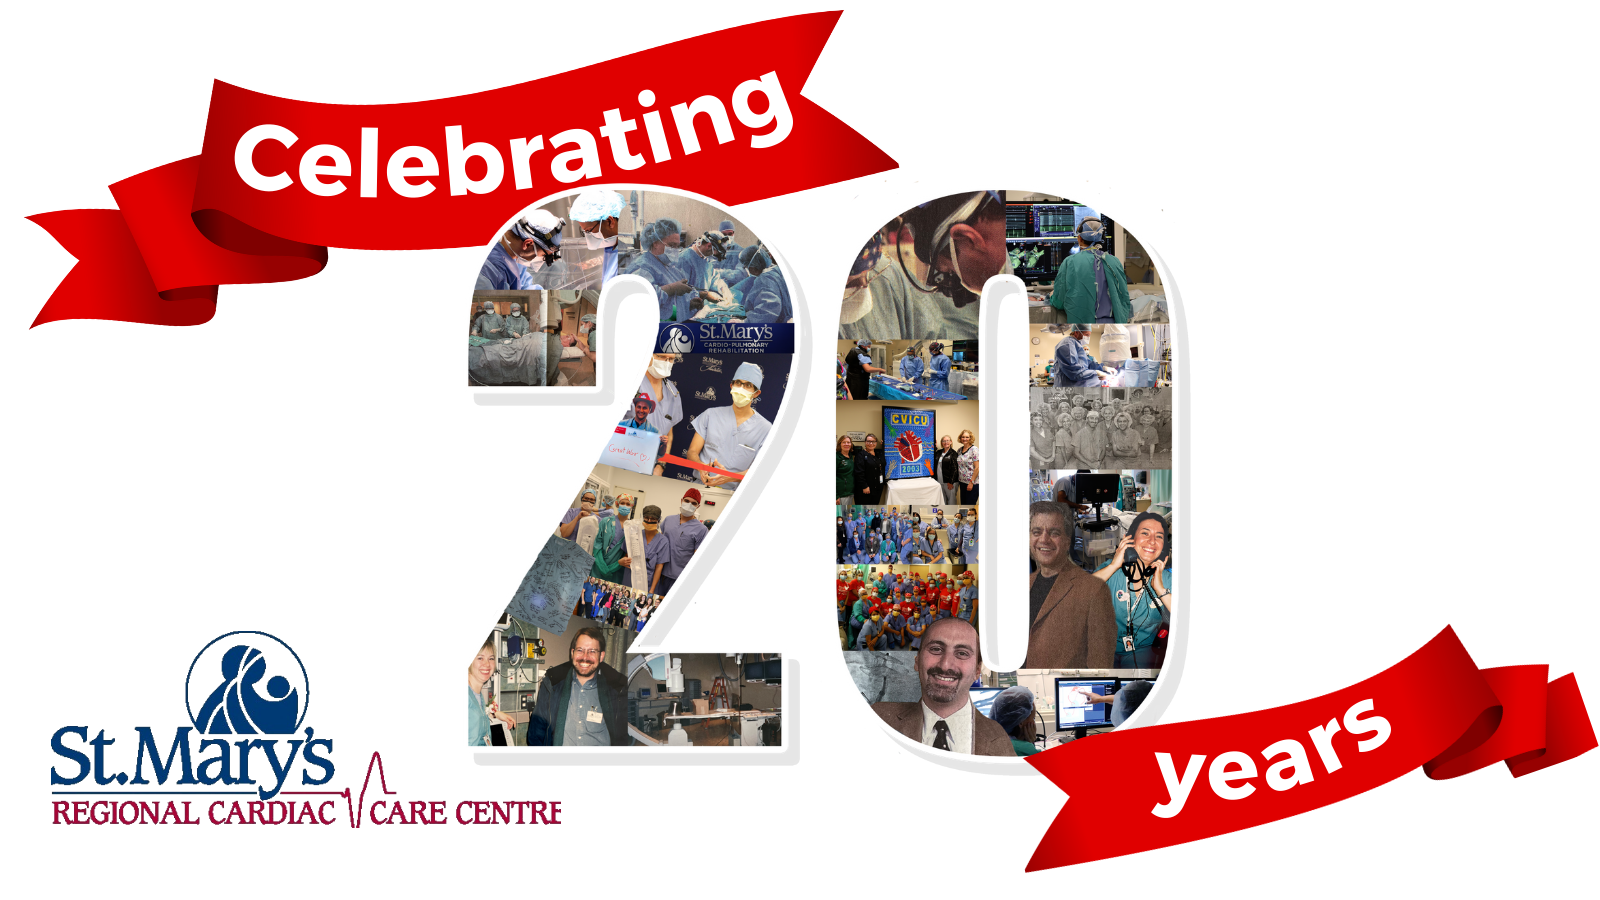 Image with the number 20. Inside the number is a collage of photos over the years depicting moments in cardiac care. The text reads "Celebrating 20 Years of Cardiac Excellence"